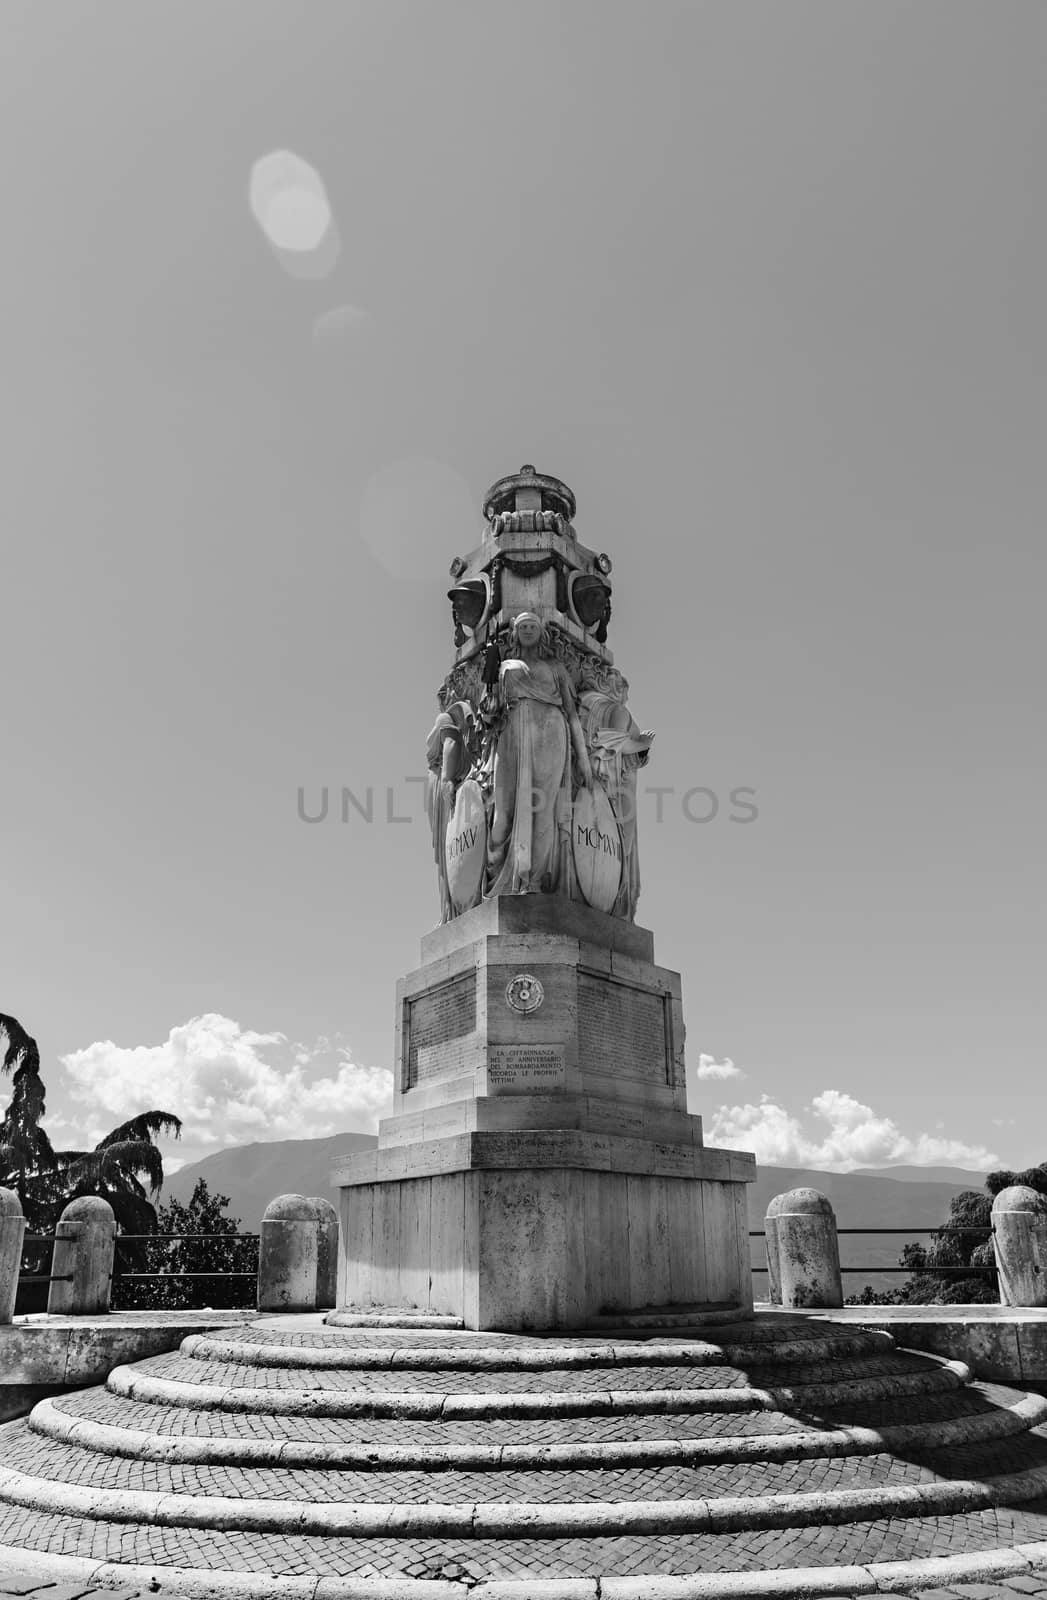 The war memorial  by Volterrani Volterrano inaugurated in 1931 is placed in Cavour square -ANAGNI -ITALY to commemorate the fallen soldiers during the First World War with symbols of Victory , Glorification and Remembrance , the top faces remember fallen soldiers -black and white photography